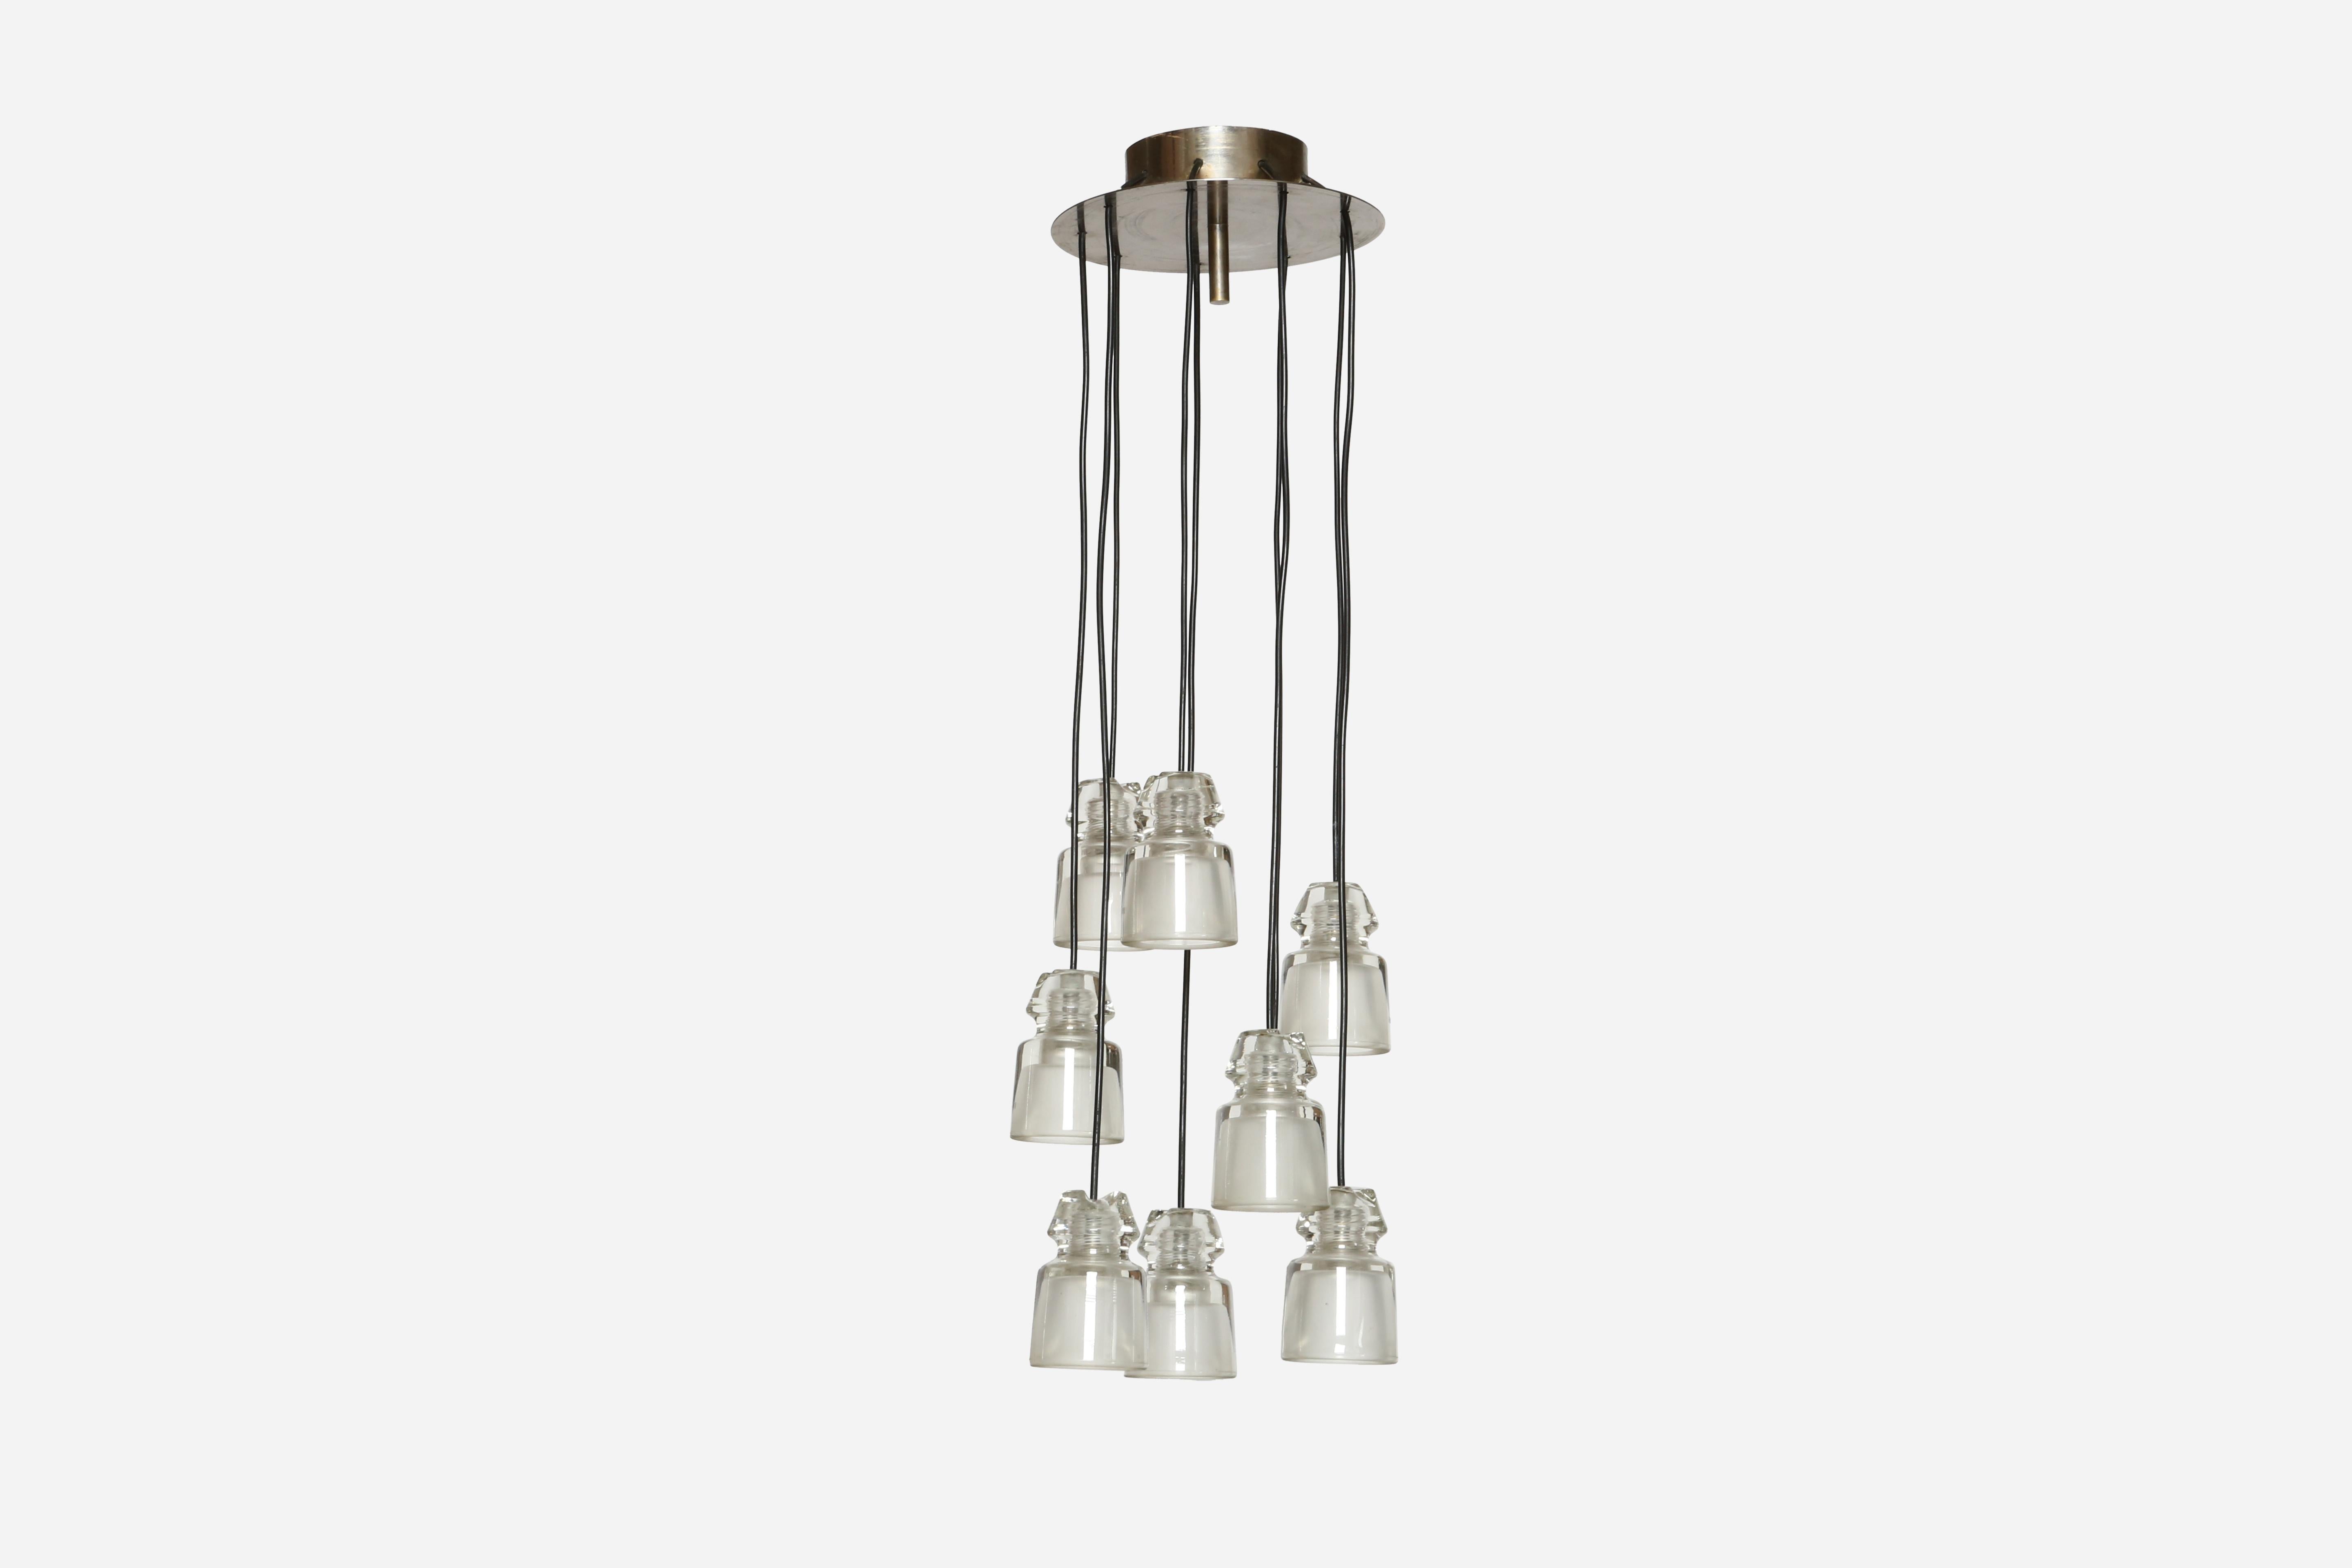 Cascading chandelier by Marco Zanuso for Oluce.
Model 6119.
Designed and manufactured in Italy in 1960s.
Crystal glass, nickel plated brass.
Rare and very impressive.
Nine sockets.
Complimentary US rewiring upon request.

At Illustris Lighting our